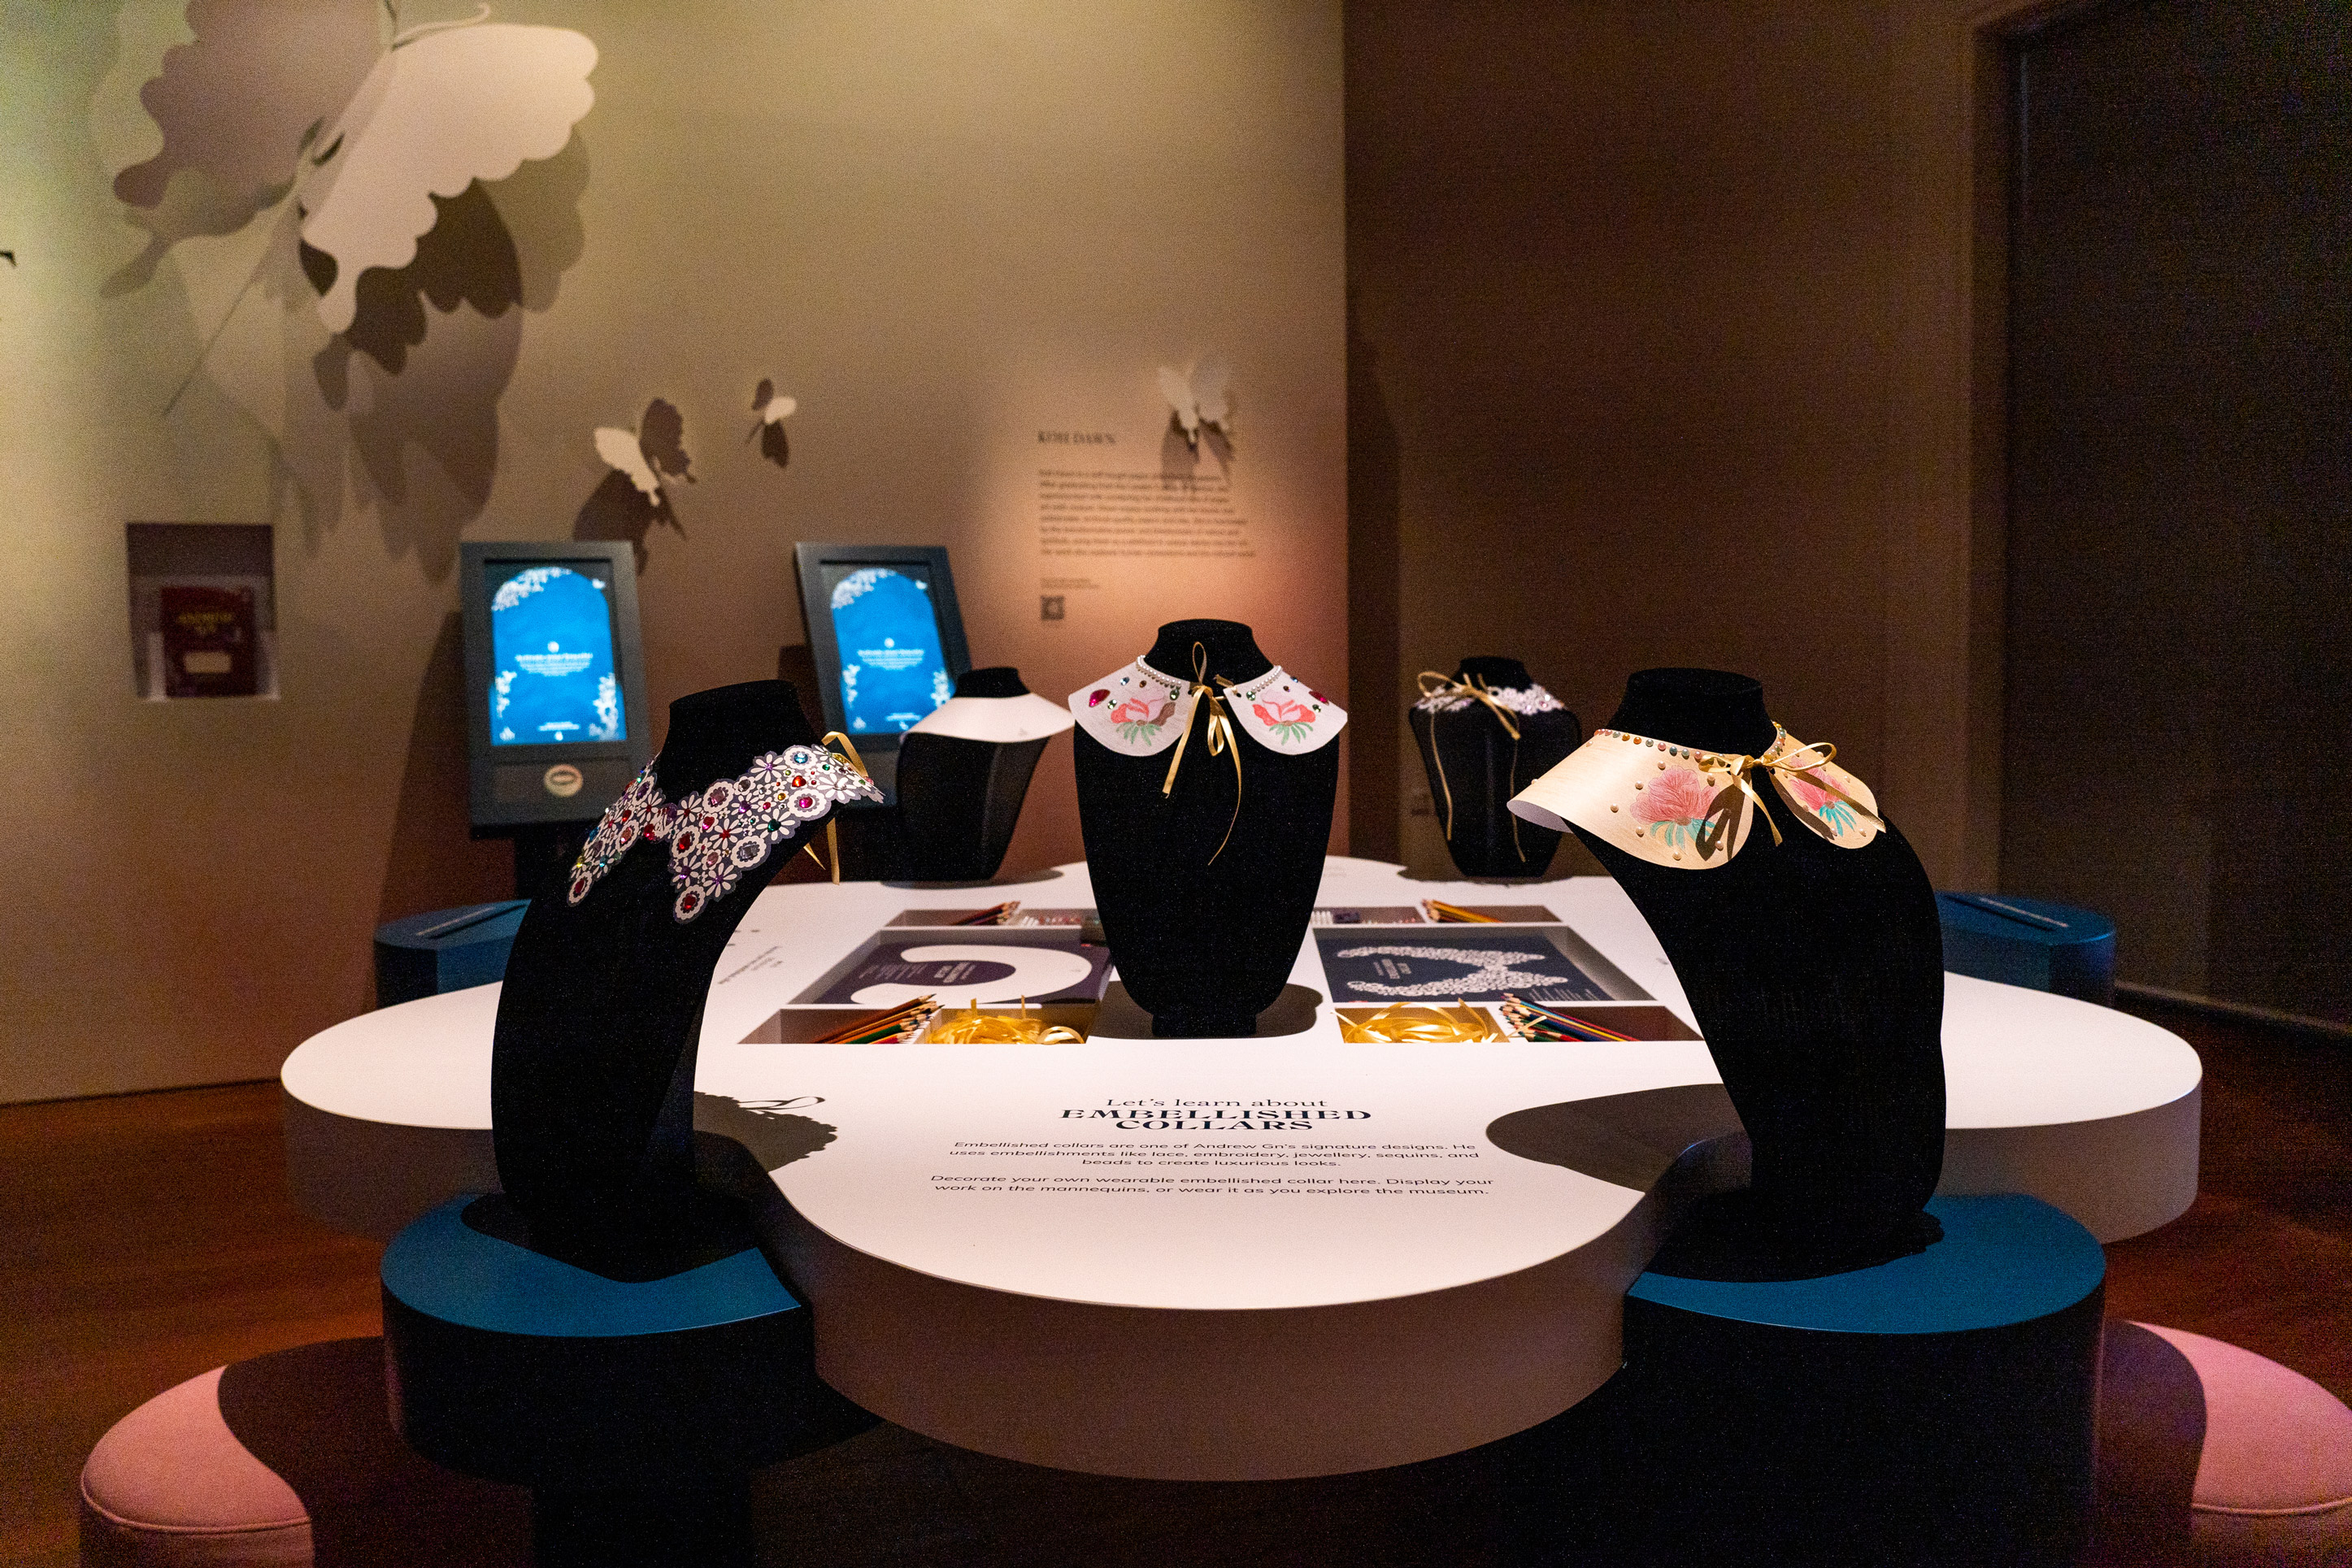 Different personalised collars displayed for reference and inspiration for people to create their own.